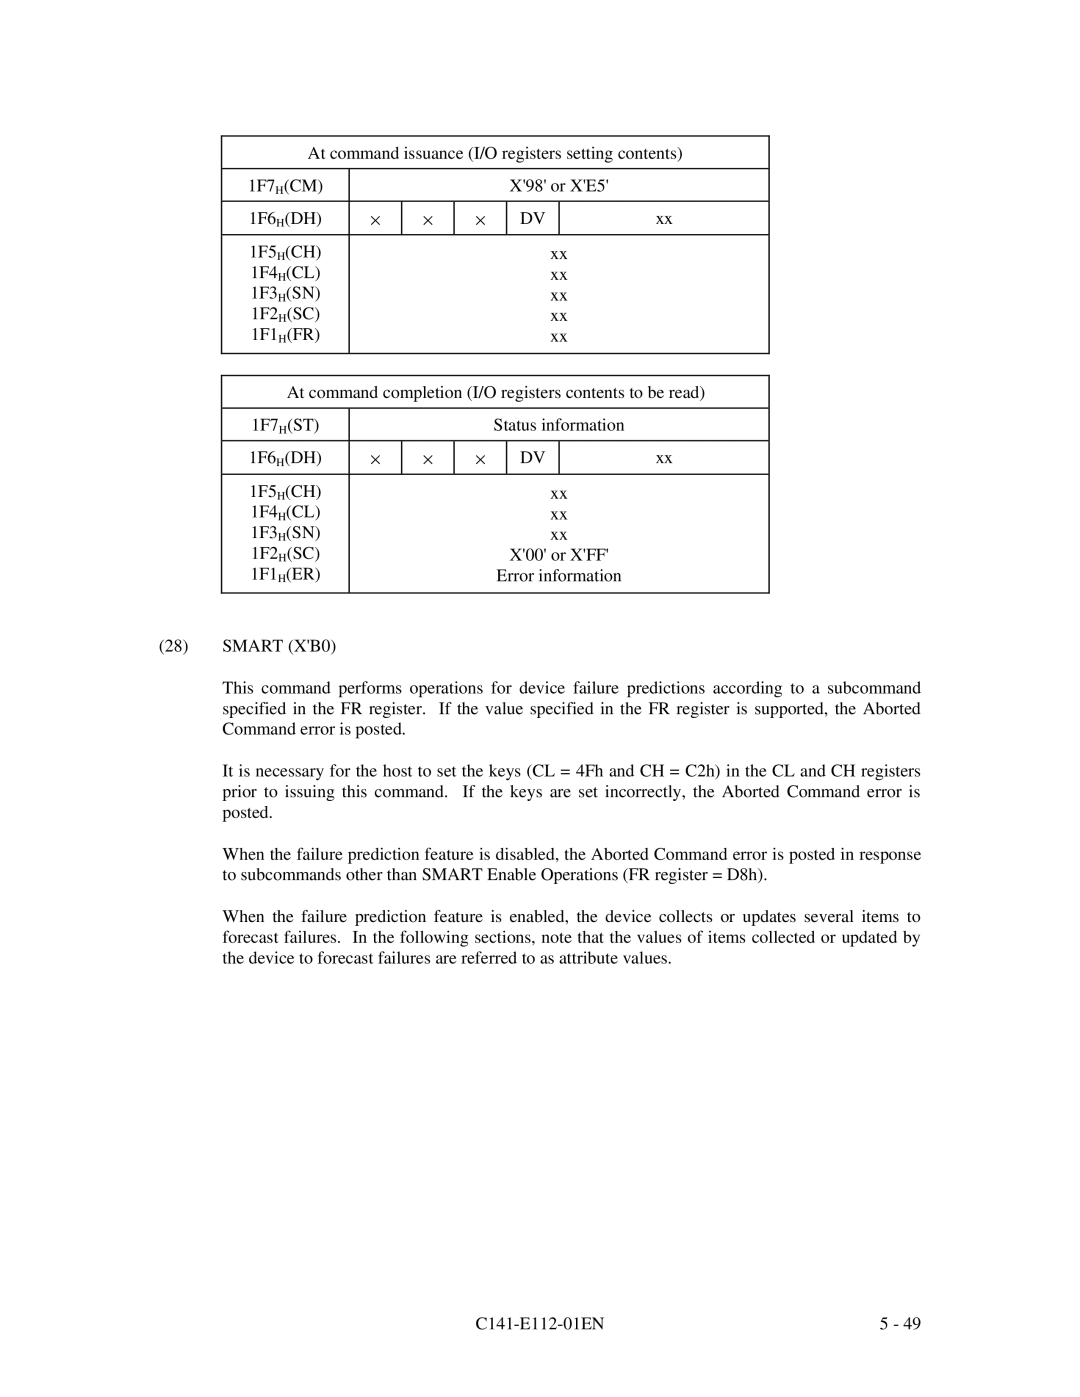 Fujitsu MPG3XXXAH manual At command issuance I/O registers setting contents, 1F7 HCM, X98 or XE5, 1F6 HDH, 1F5 HCH, 1F4 HCL 